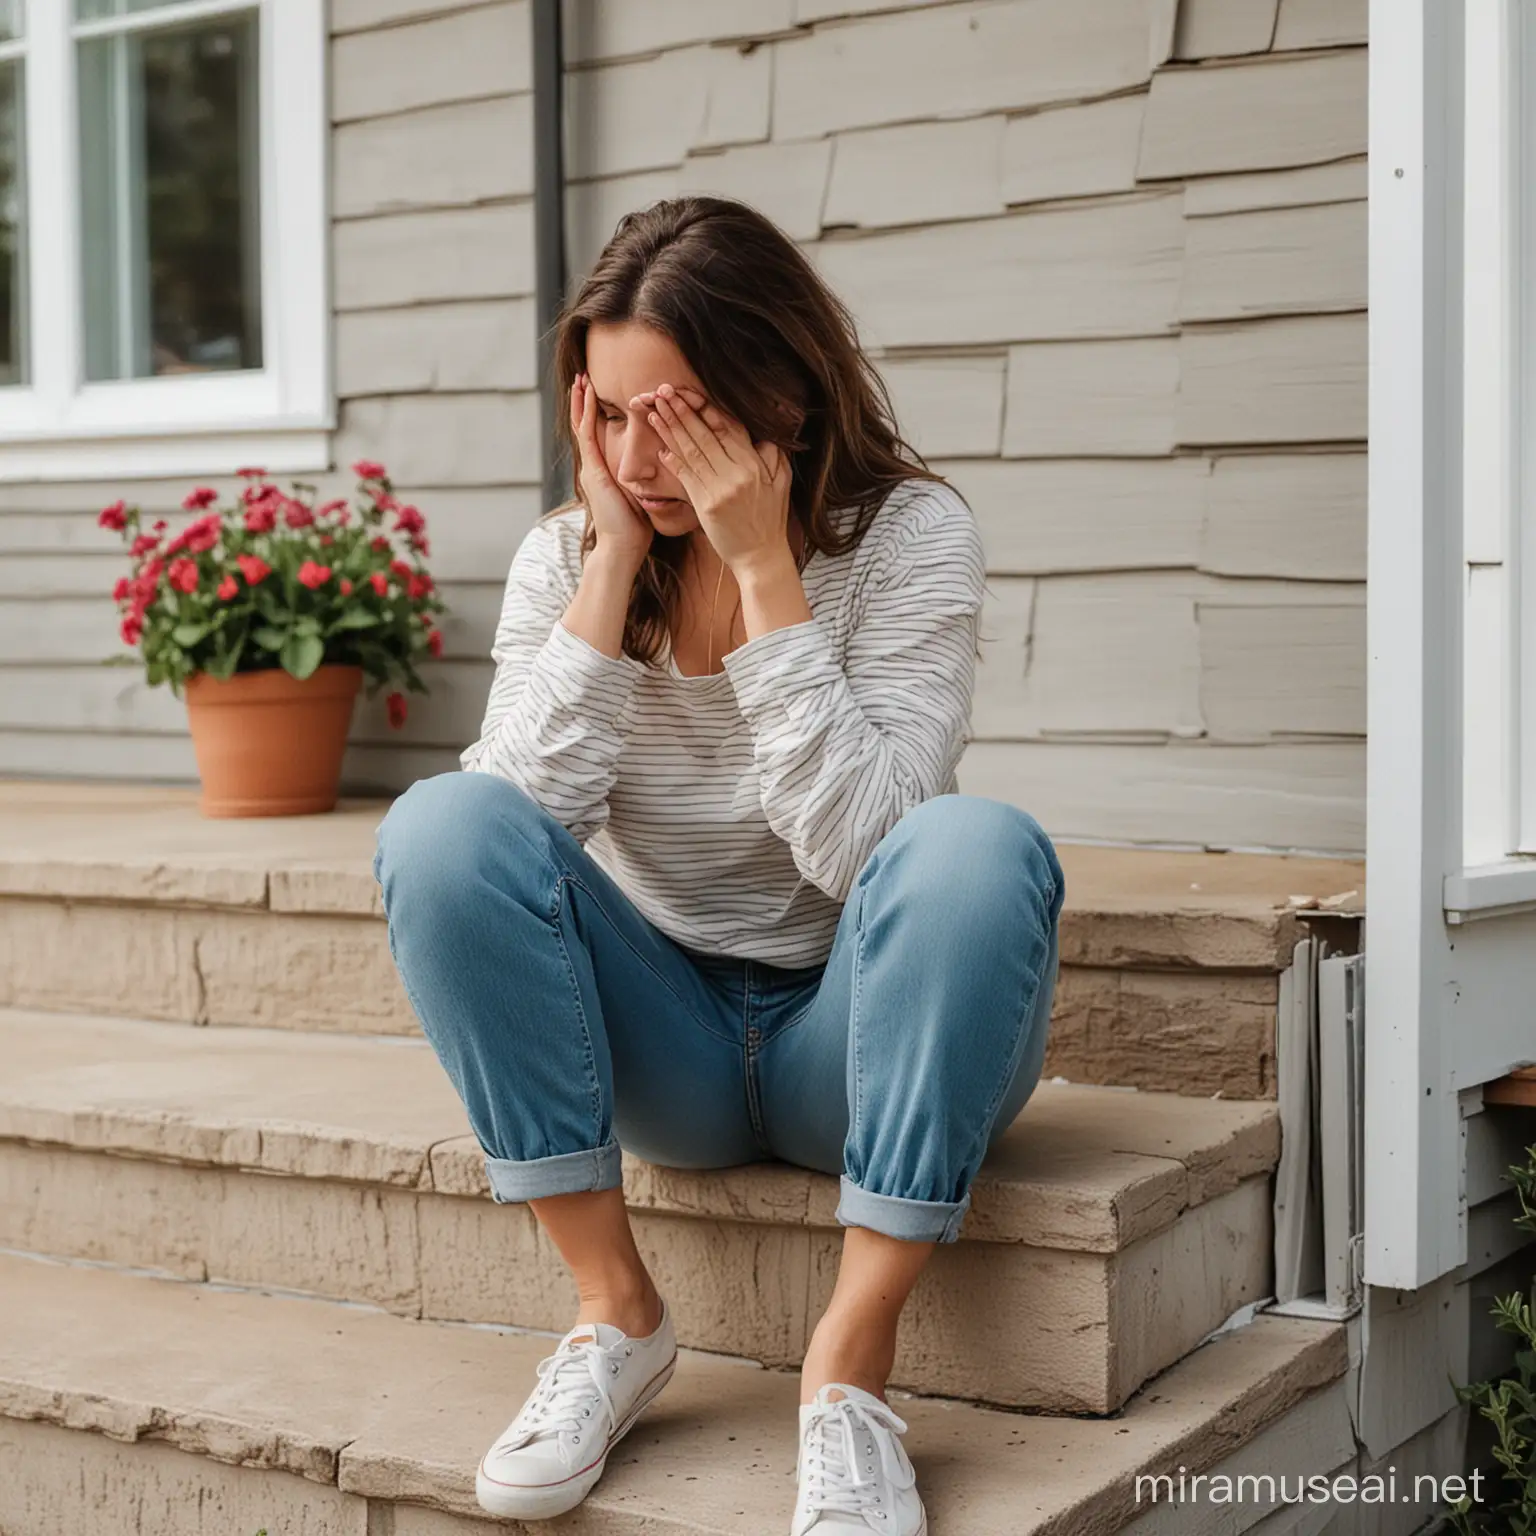 Distressed Woman Sitting Alone on Homes Front Step